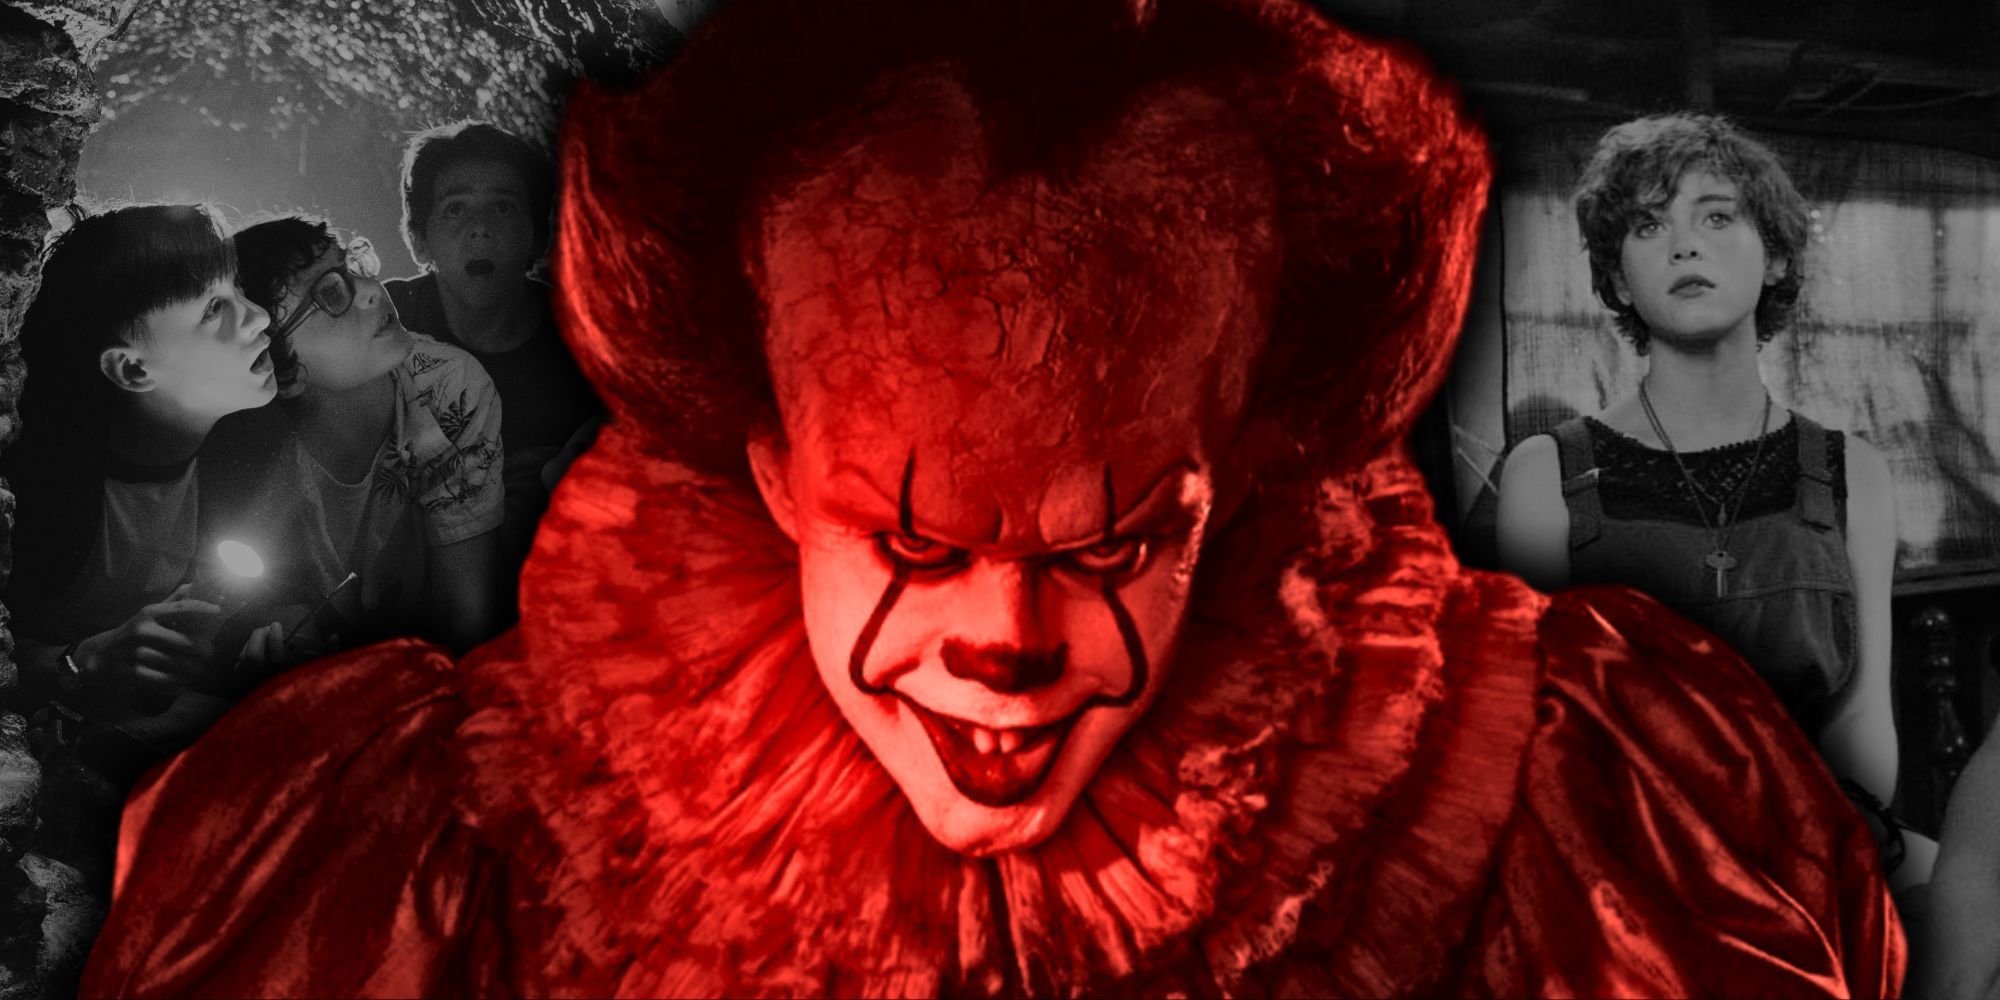 Composite image of Pennywise in front of the Losers Club from IT